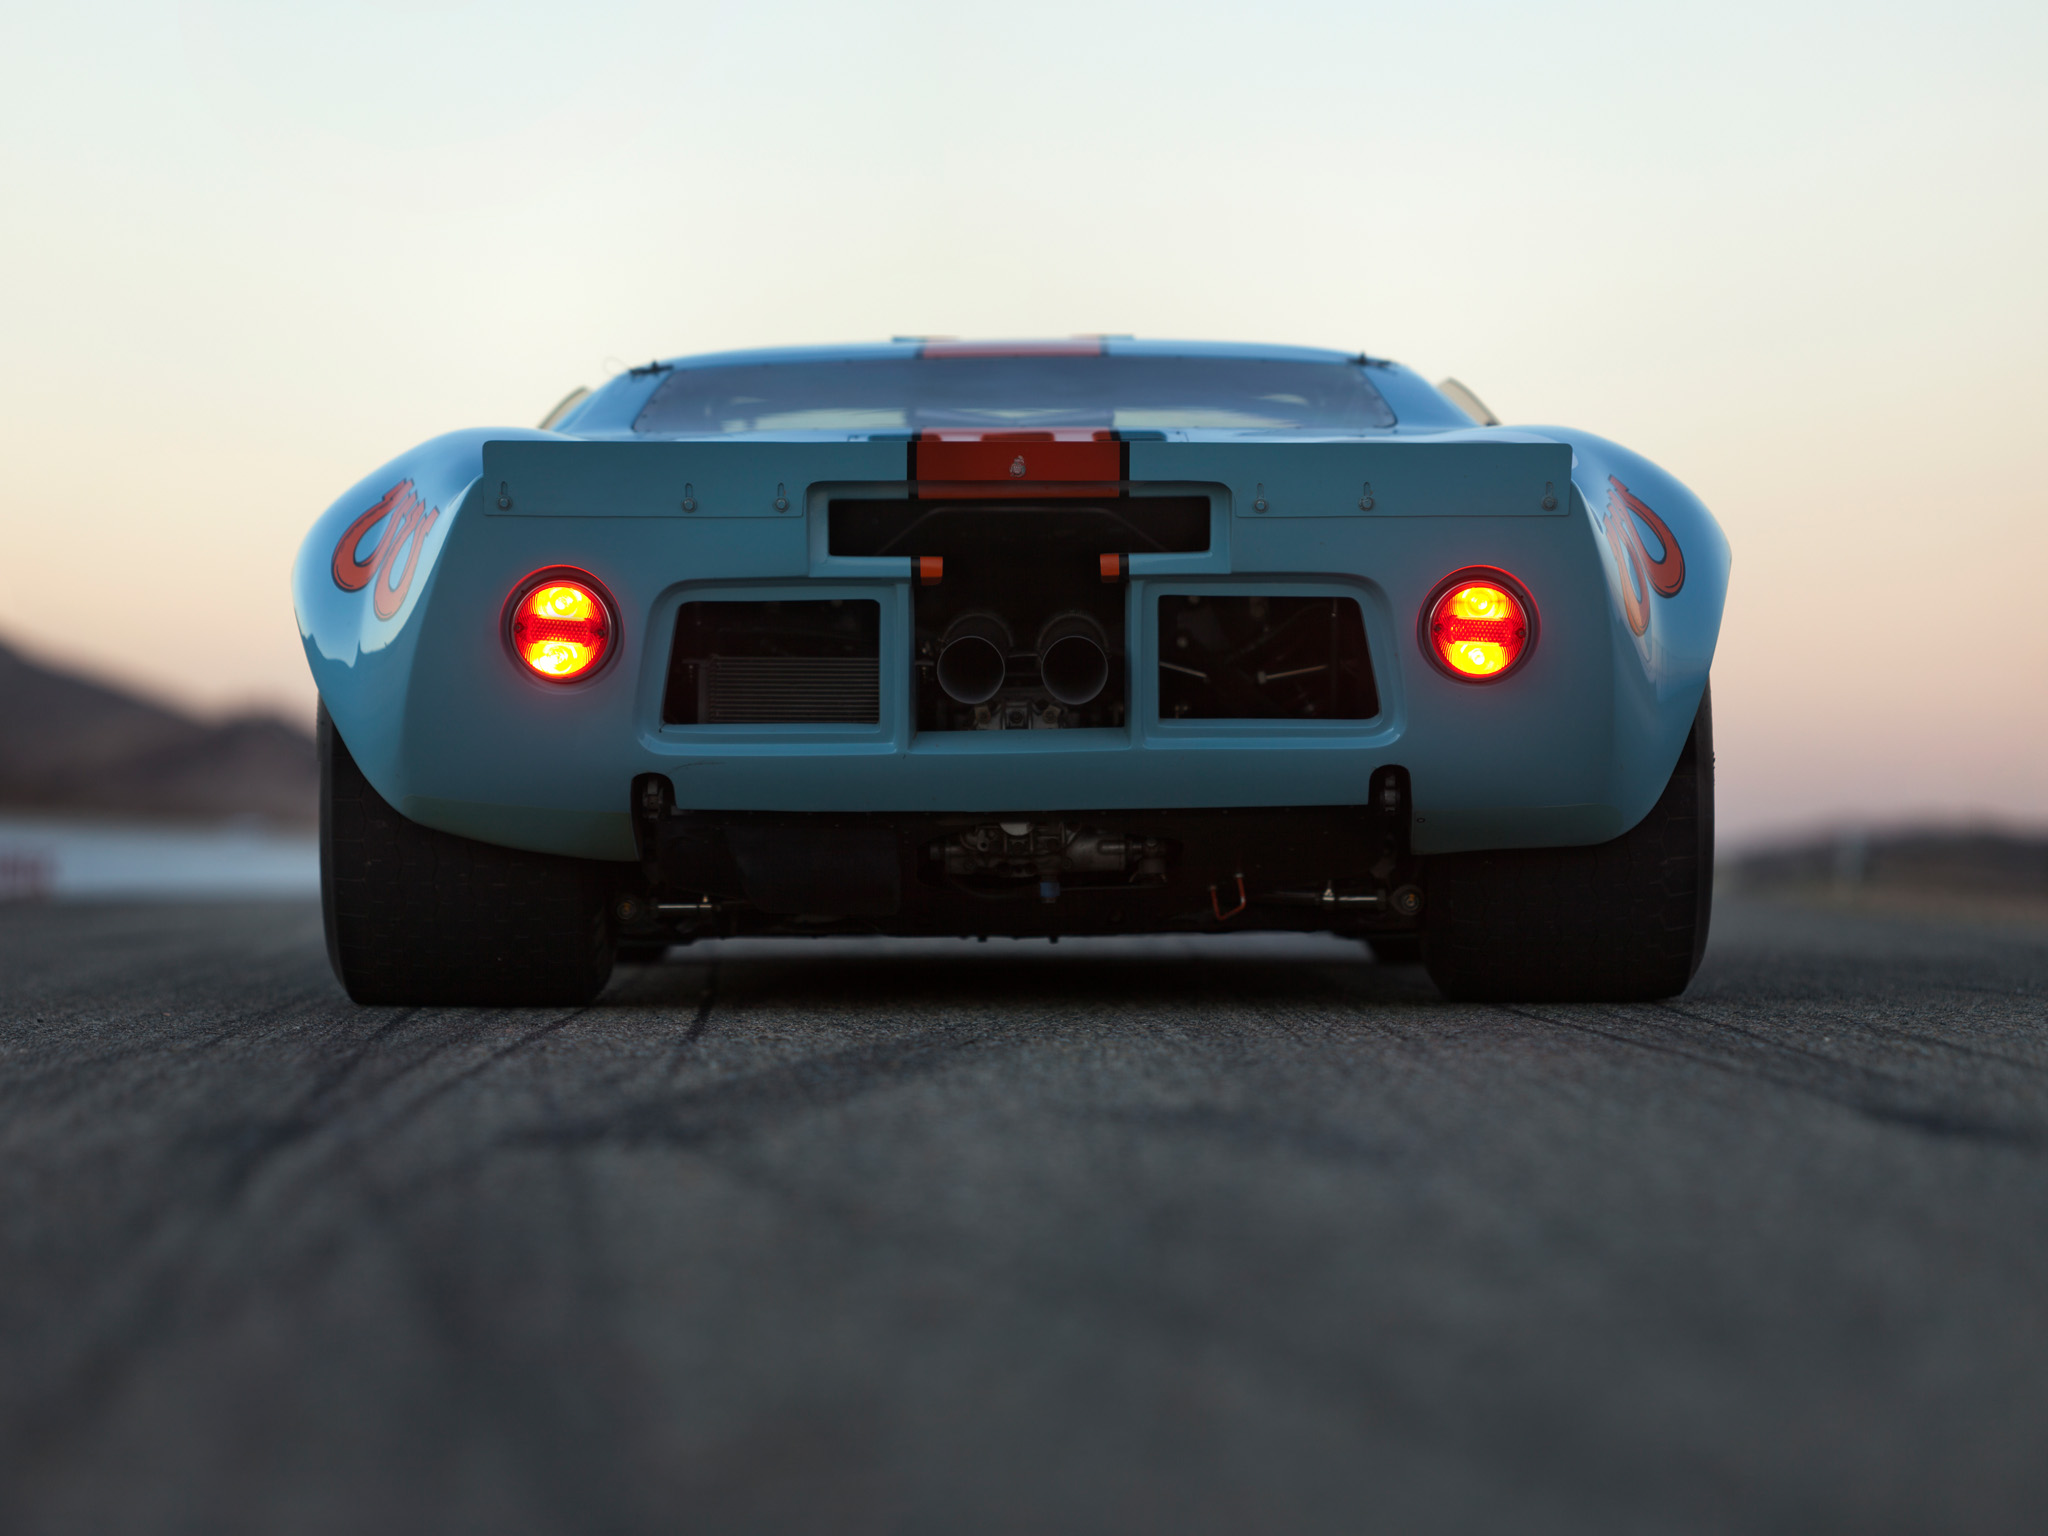 1968, Ford, Gt40, Gulf oil, Le mans, Race, Racing, Supercar, Classic, Gd Wallpaper